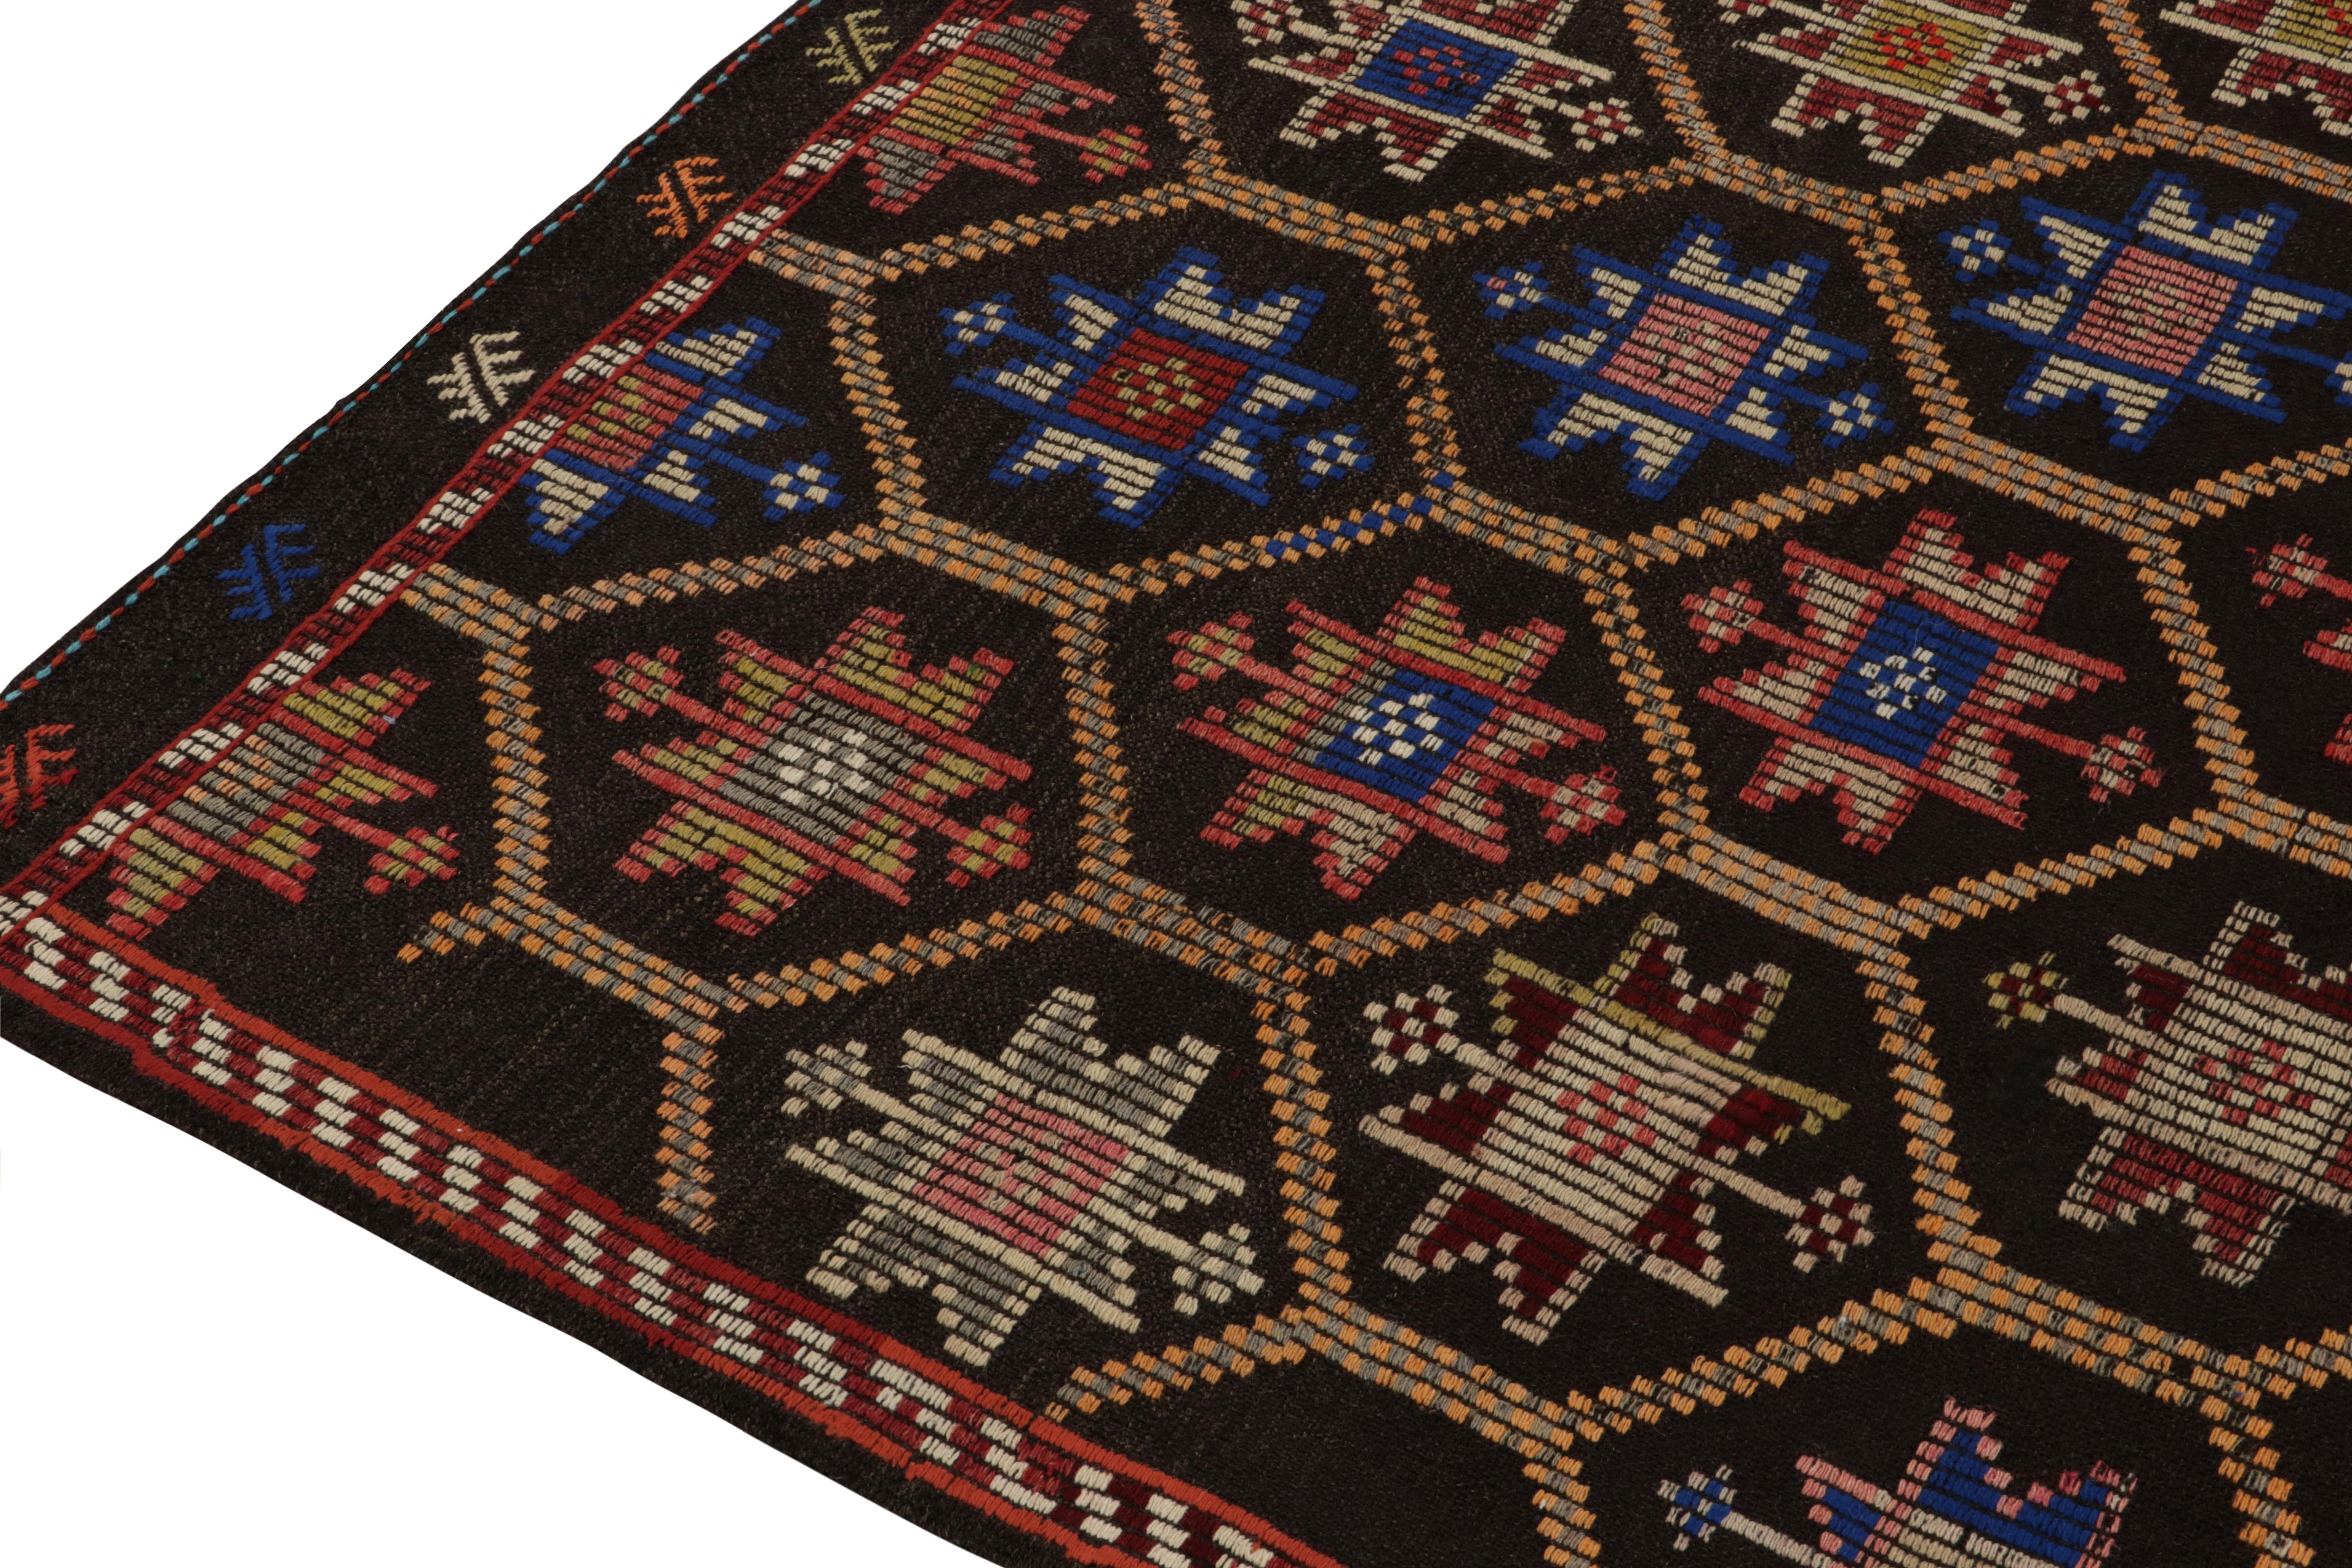 Vintage Cecim Kilim, Tribal Rug in Brown, Red and Blue Patterns by Rug & Kilim In Good Condition For Sale In Long Island City, NY